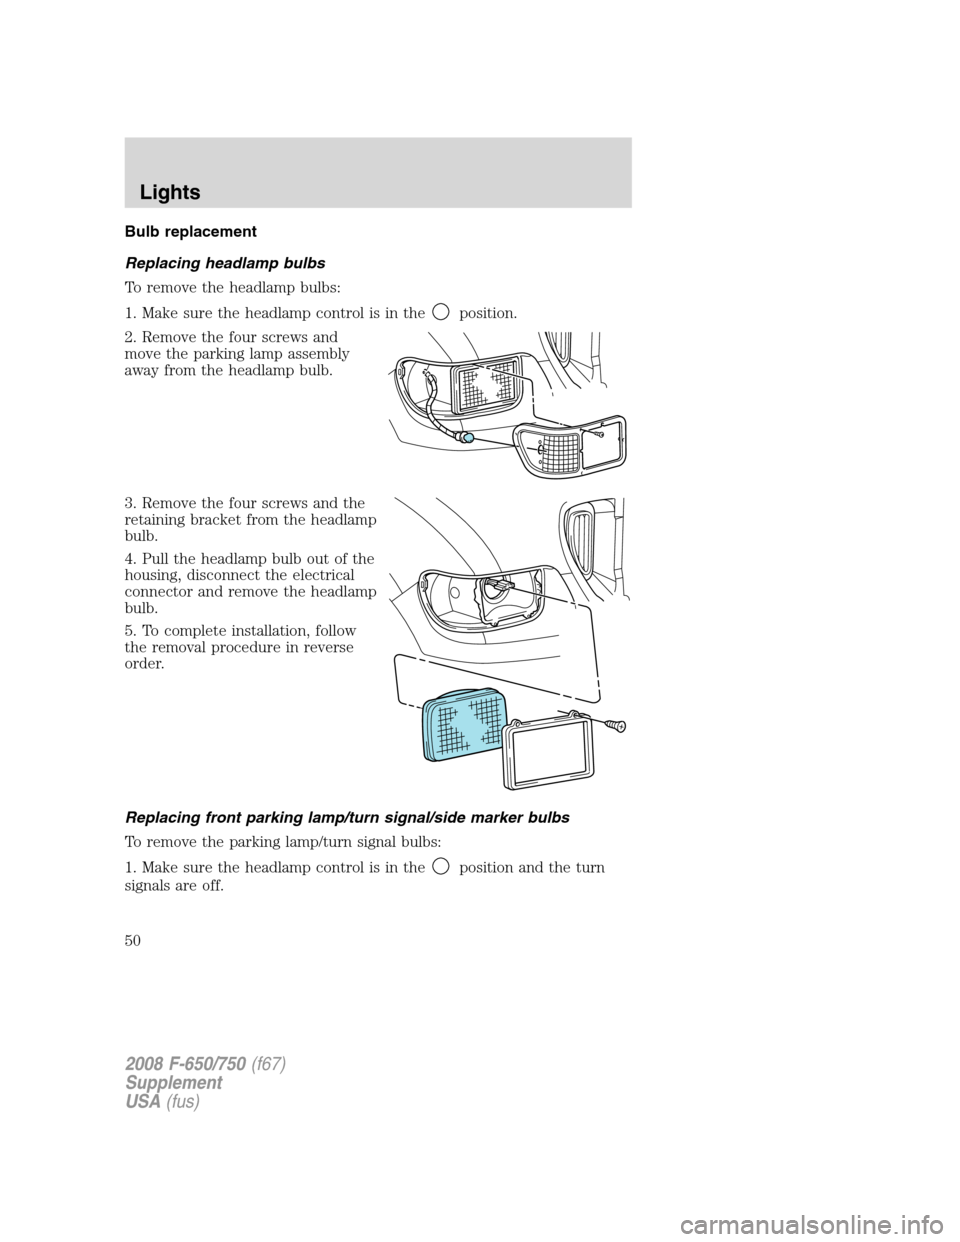 FORD F750 2008 11.G Owners Manual Bulb replacement
Replacing headlamp bulbs
To remove the headlamp bulbs:
1. Make sure the headlamp control is in the
position.
2. Remove the four screws and
move the parking lamp assembly
away from the